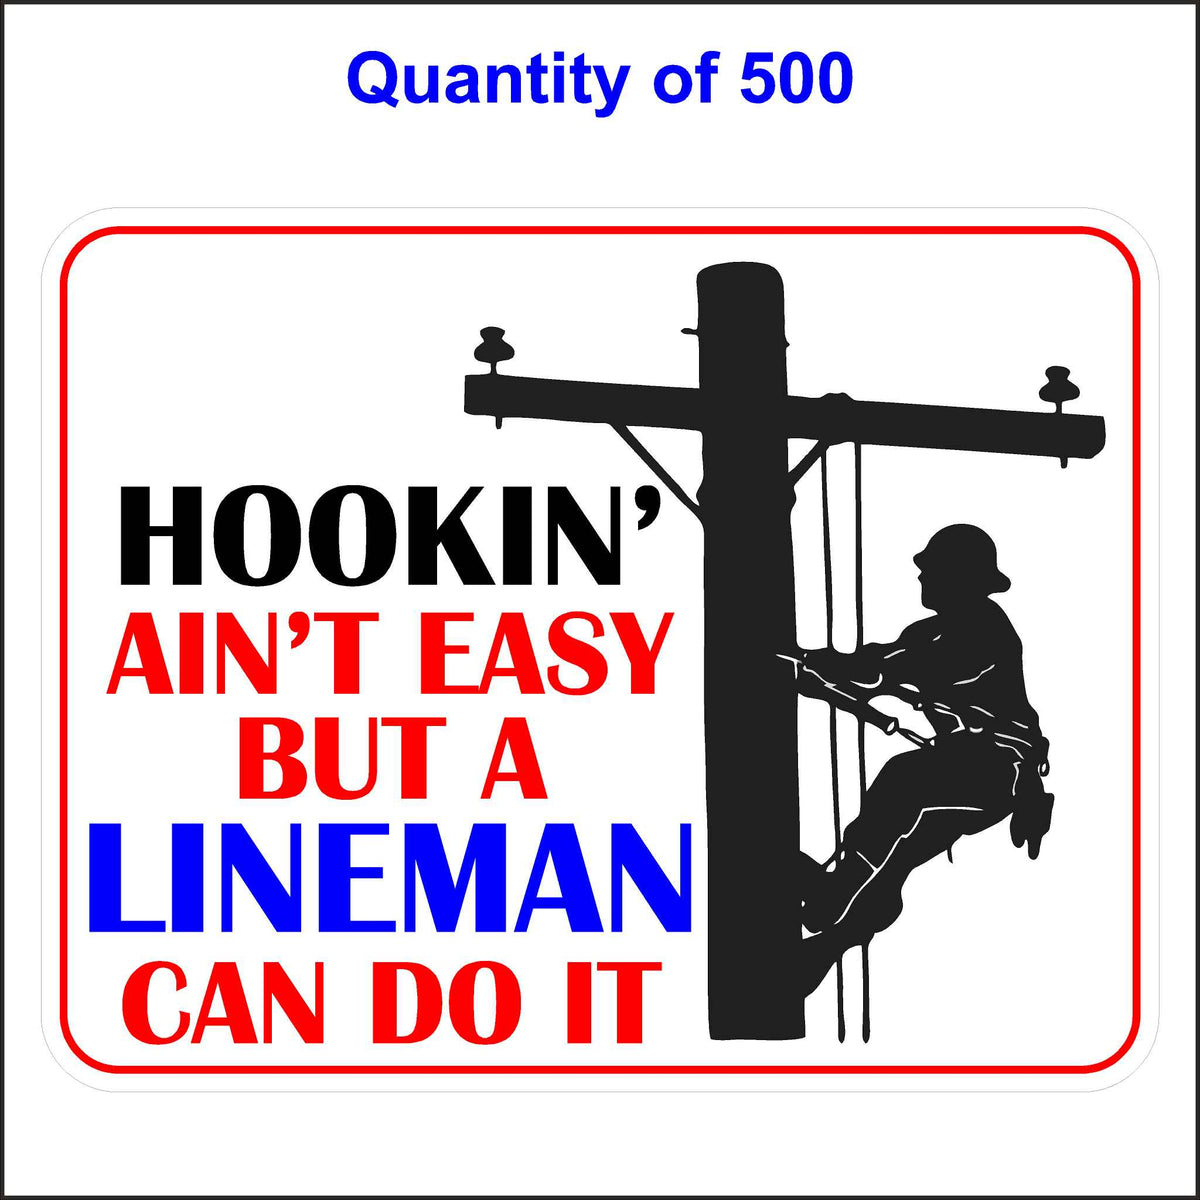 Lineman Sticker Printed With a Picture of a Lineman on a Pole. The Words “Hookin’ Ain’t Easy but a Lineman Can Do It” Are Printed in Red and Blue. 500 Quantity.